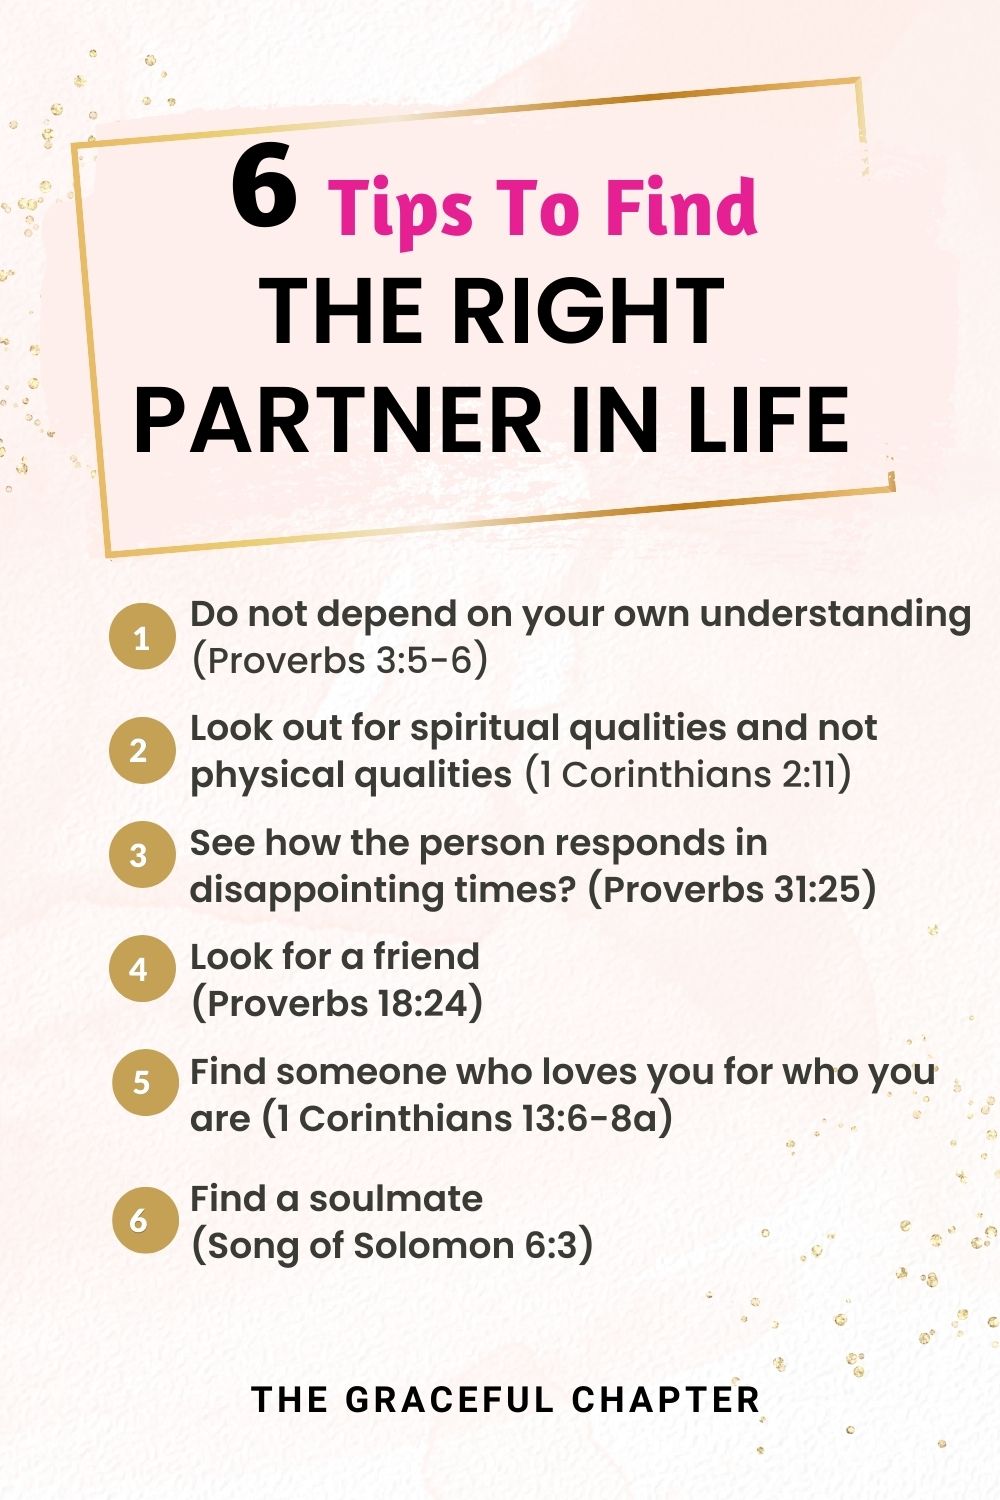 6 tips to find the right partner in life